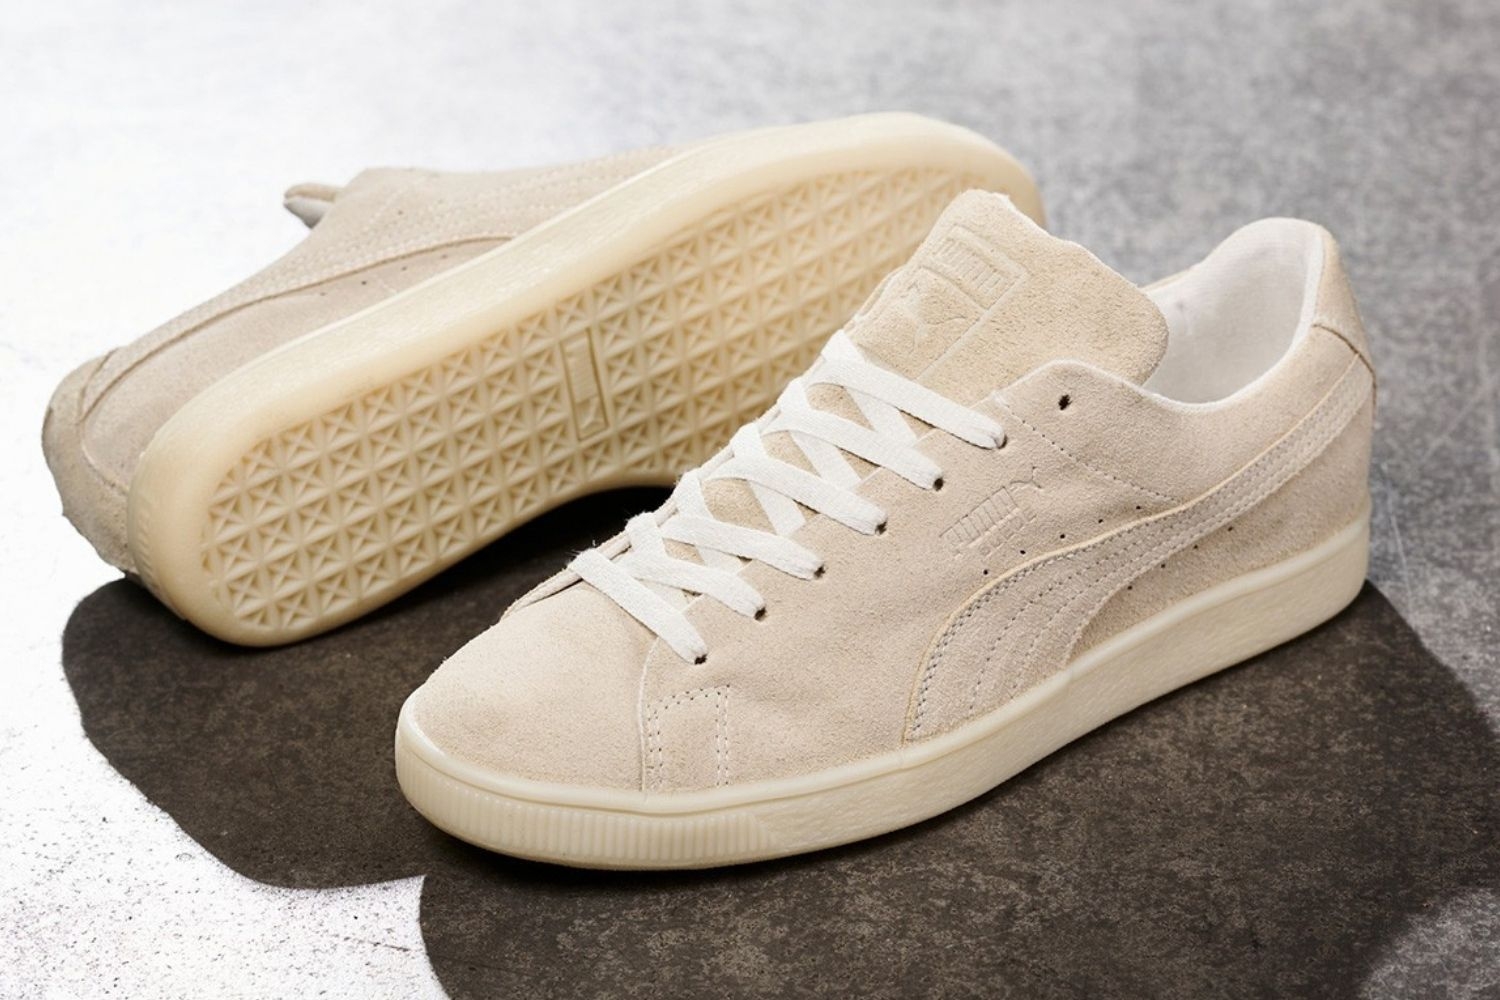 PUMA comes out with Re:Suede sustainability sneaker